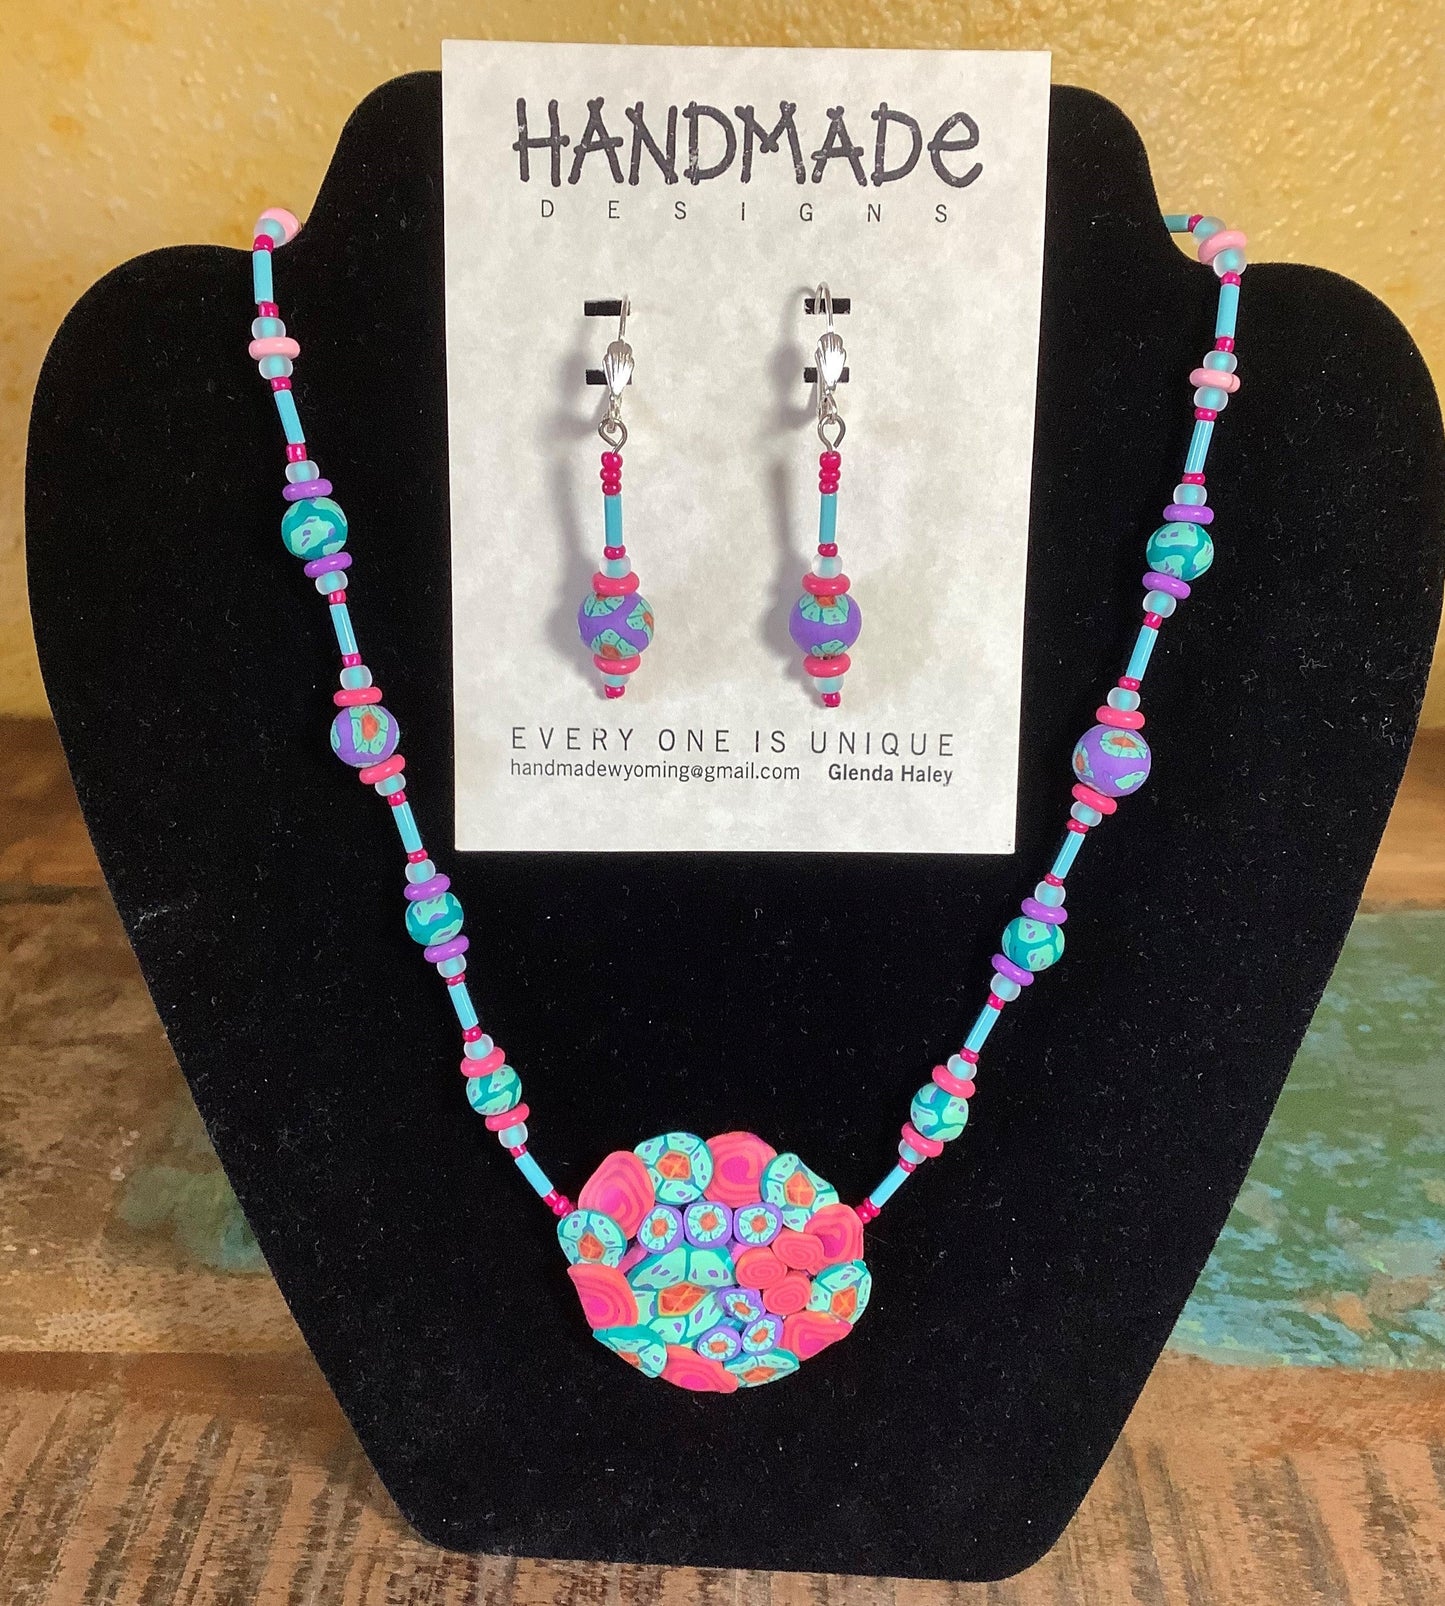 Teal and Pink swirl beads. Necklace: Variety Mixed Colors Polymer Clay Necklace and Earring Set Artist: Glenda Haley  Original, handcrafted Necklaces with matching Earrings  Created from Polymer Clay in Yellow, Orange and Purple swirls  The Earrings are drop beads from matching clay  Polymer Can Techniques  Beads are hand made  Glass accent be